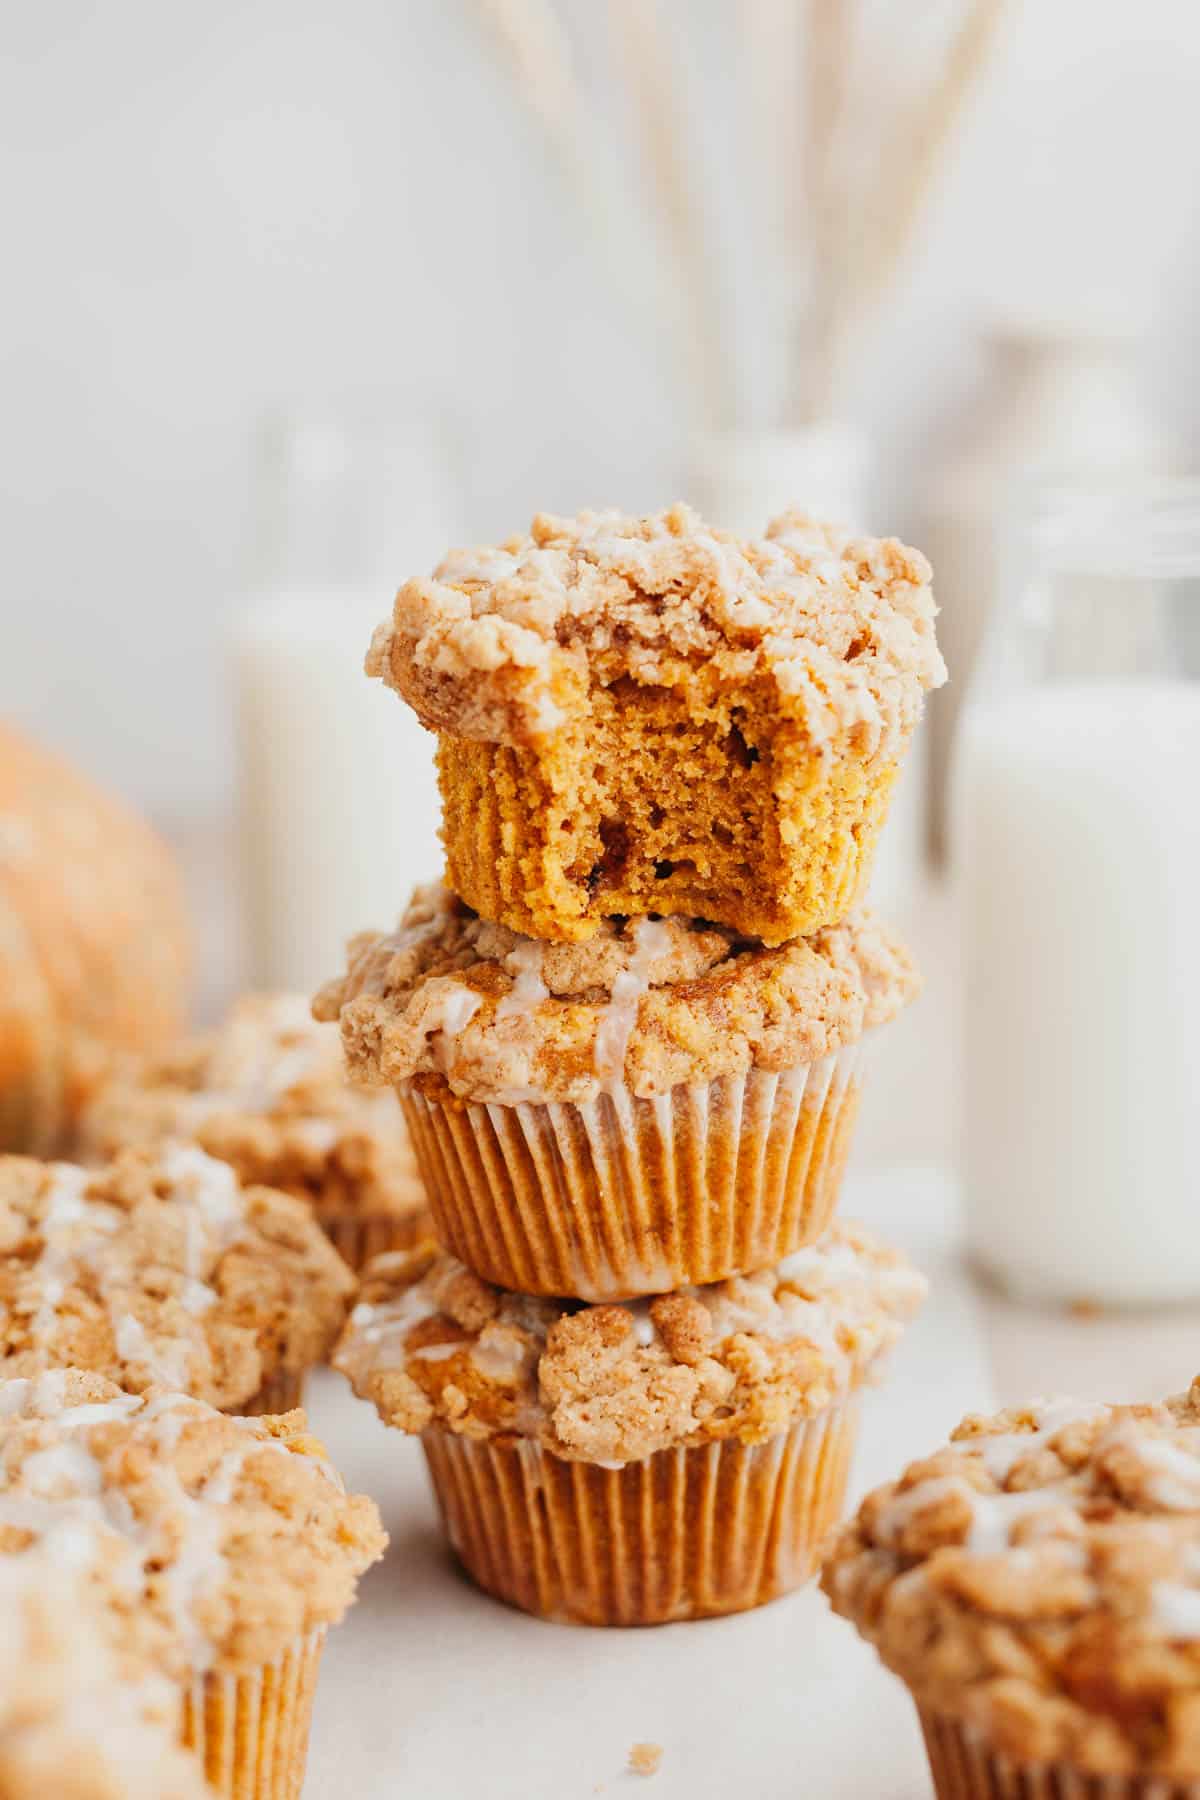 A stack of three pumpkin muffins with a streusel topping.